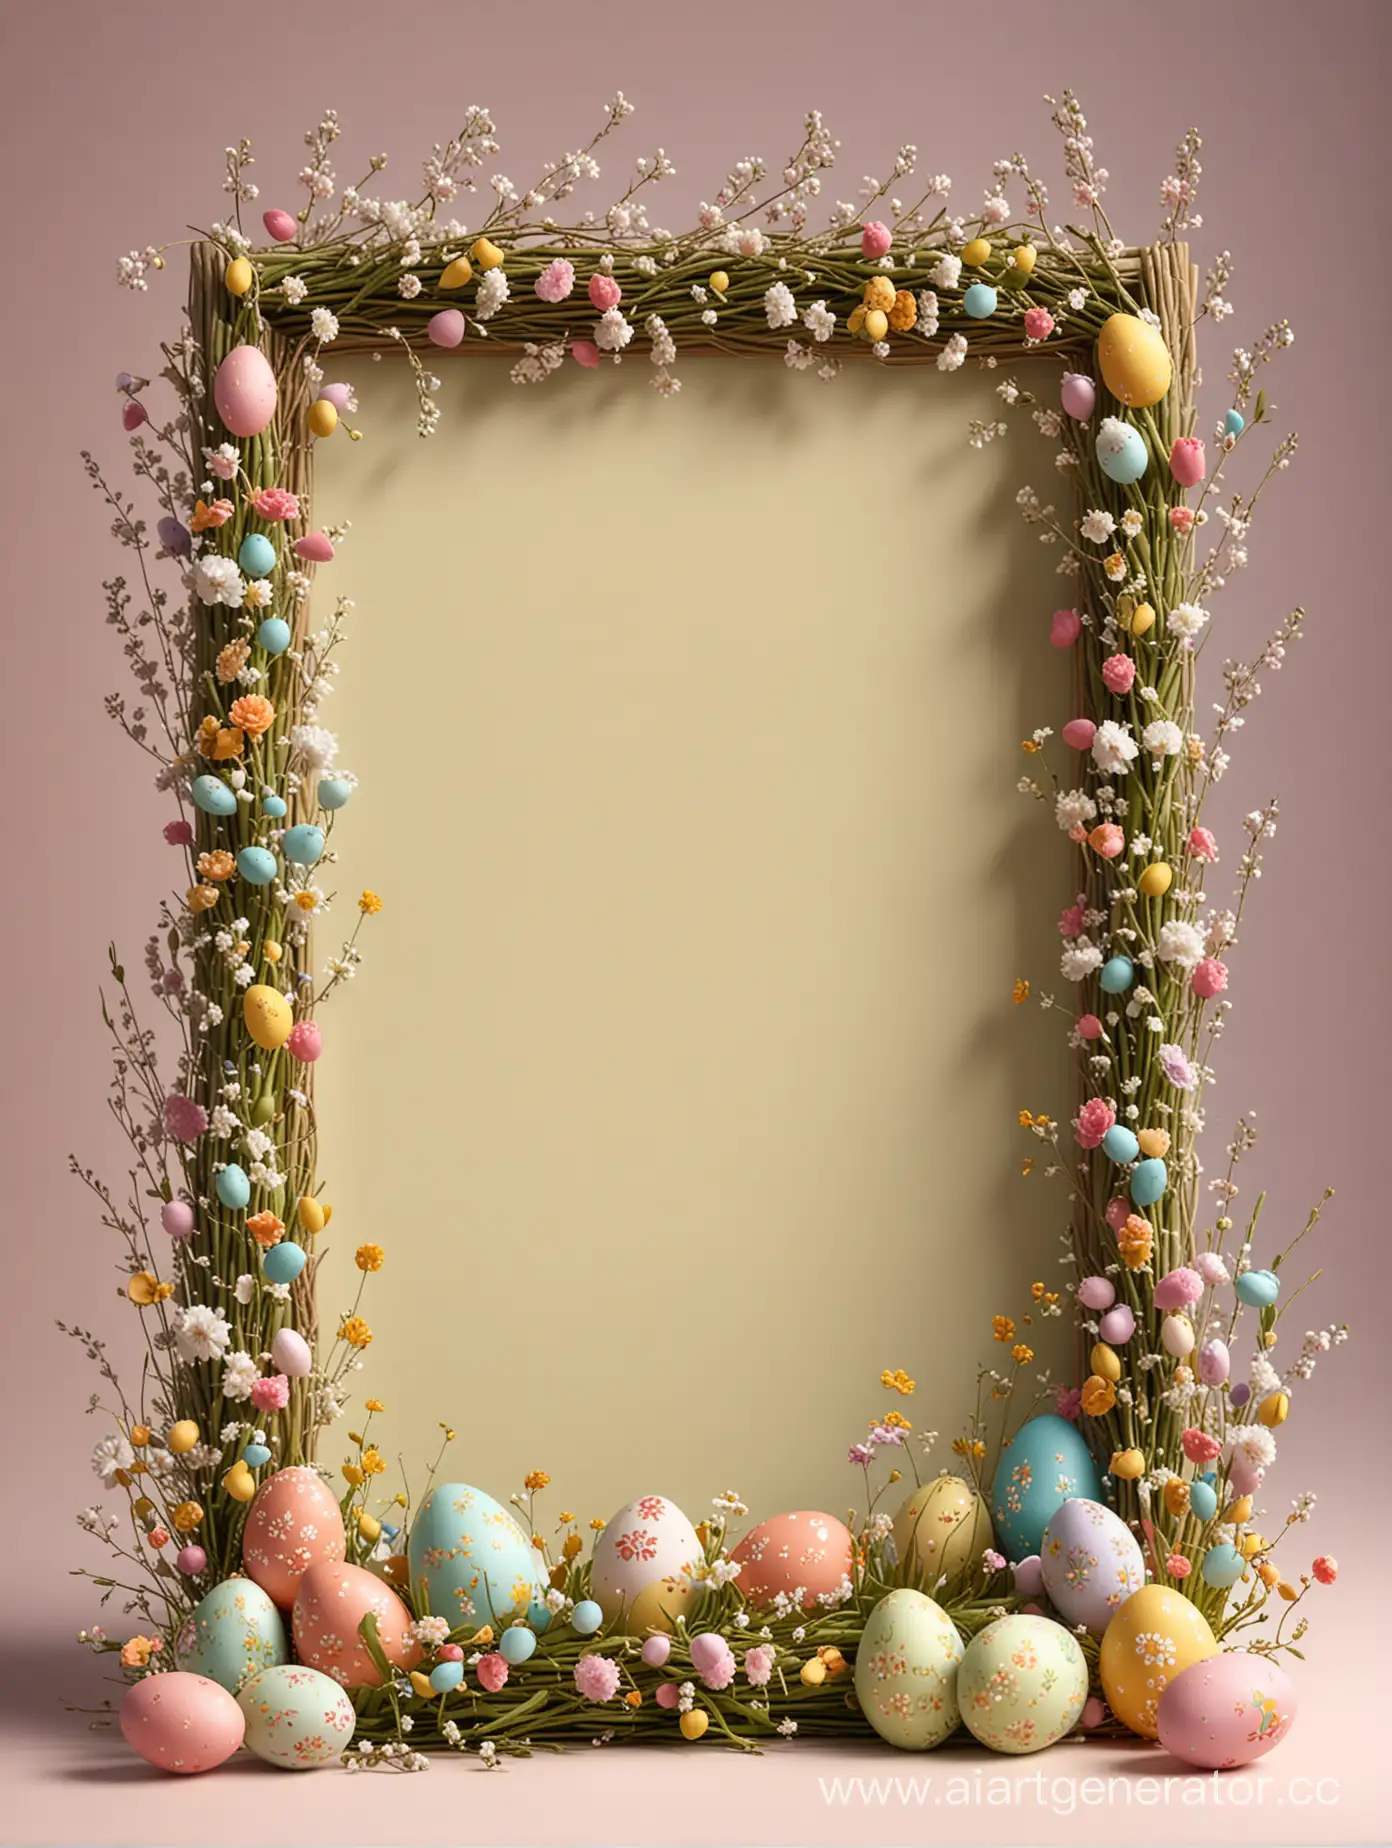 Easter-Kids-Exhibition-Frame-Festive-Spring-Celebration-with-Symbolic-Objects